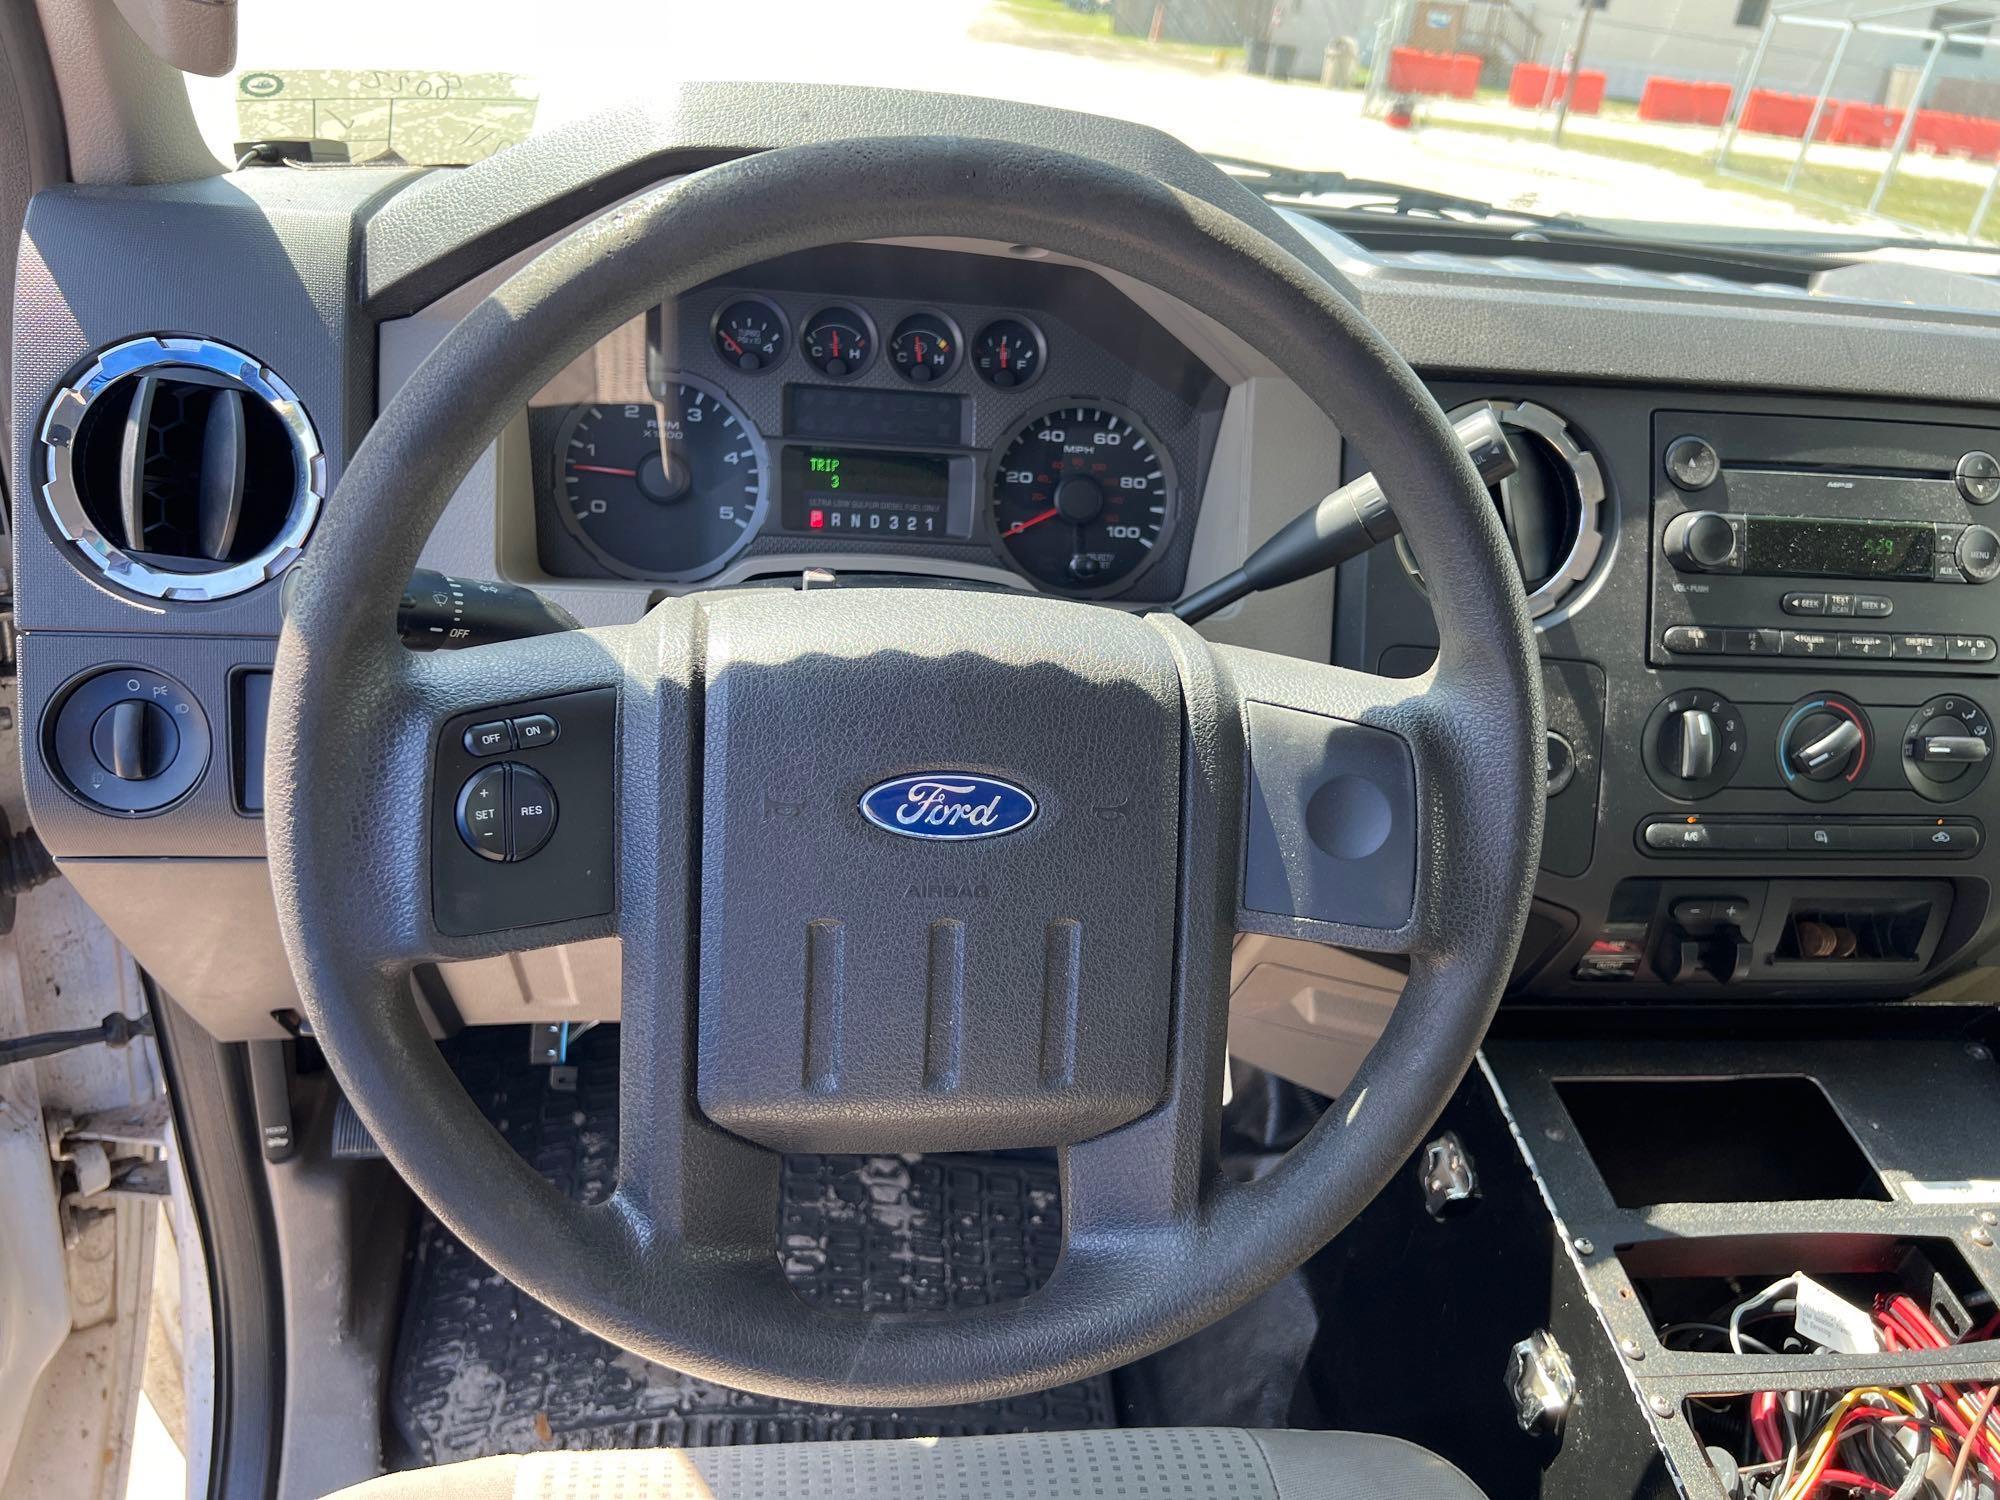 2008 Ford F-250 4x4 Crew Cab Pickup Truck - NO BUYER PREMIUM ON THIS ITEM